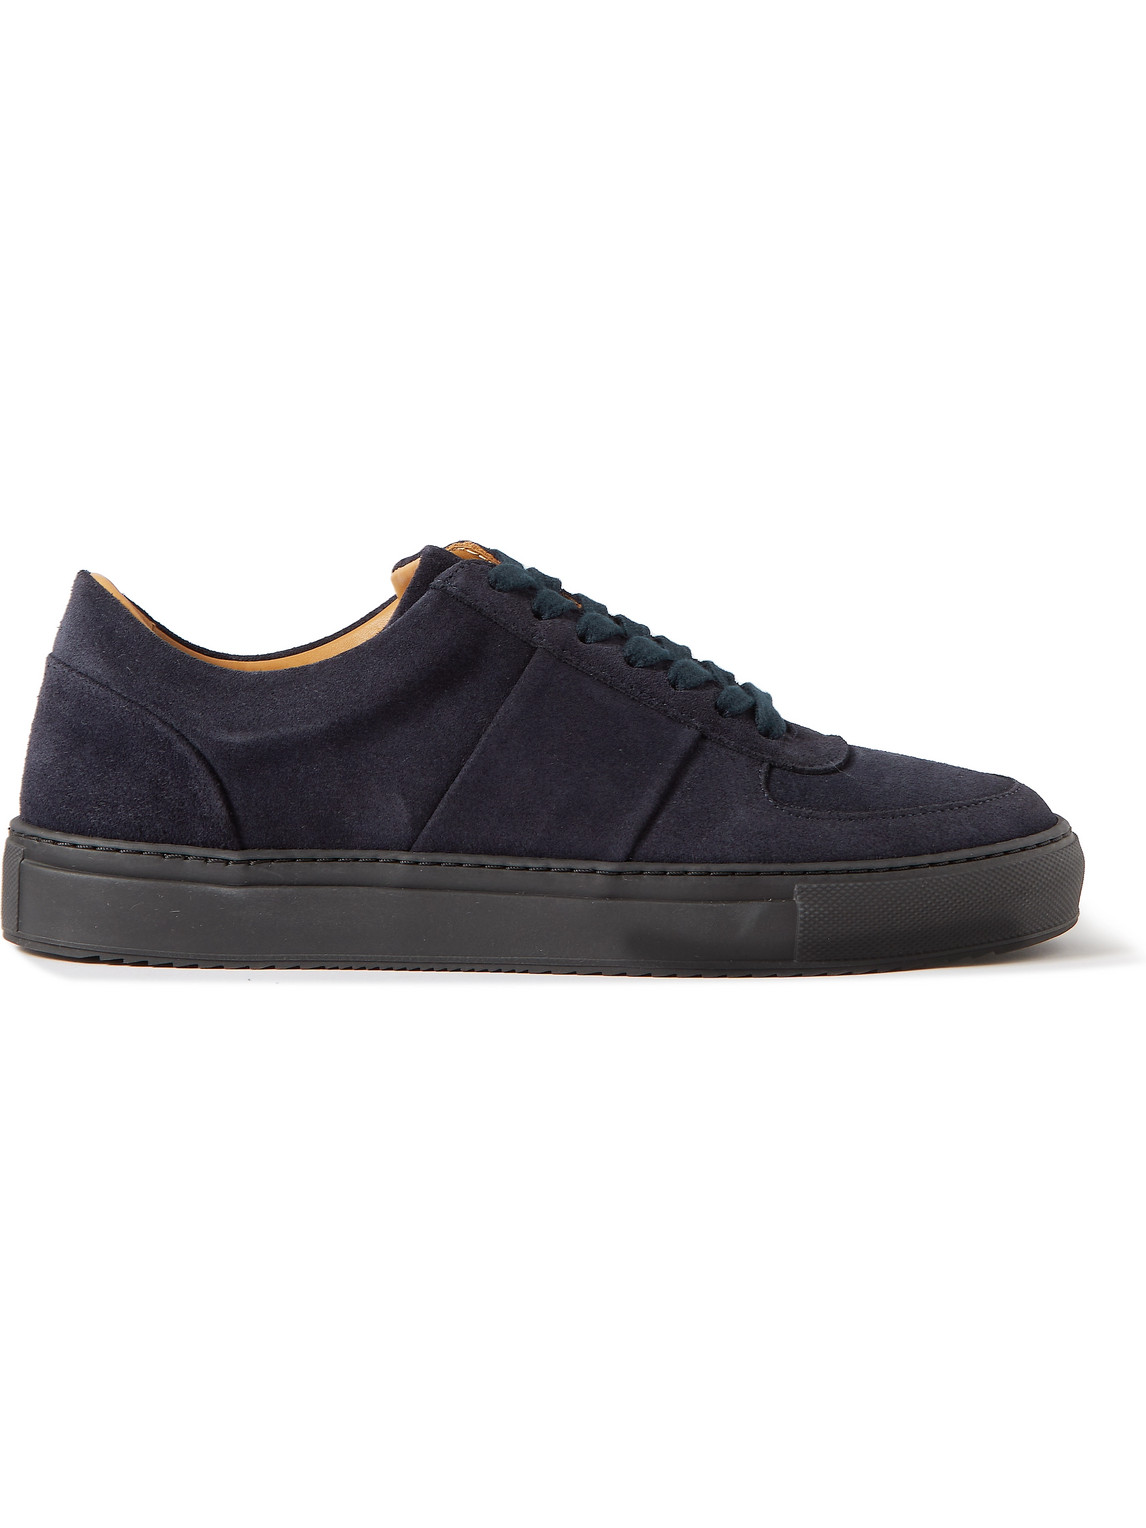 Mr P Larry Regenerated Suede By Evolo® Sneakers In Blue